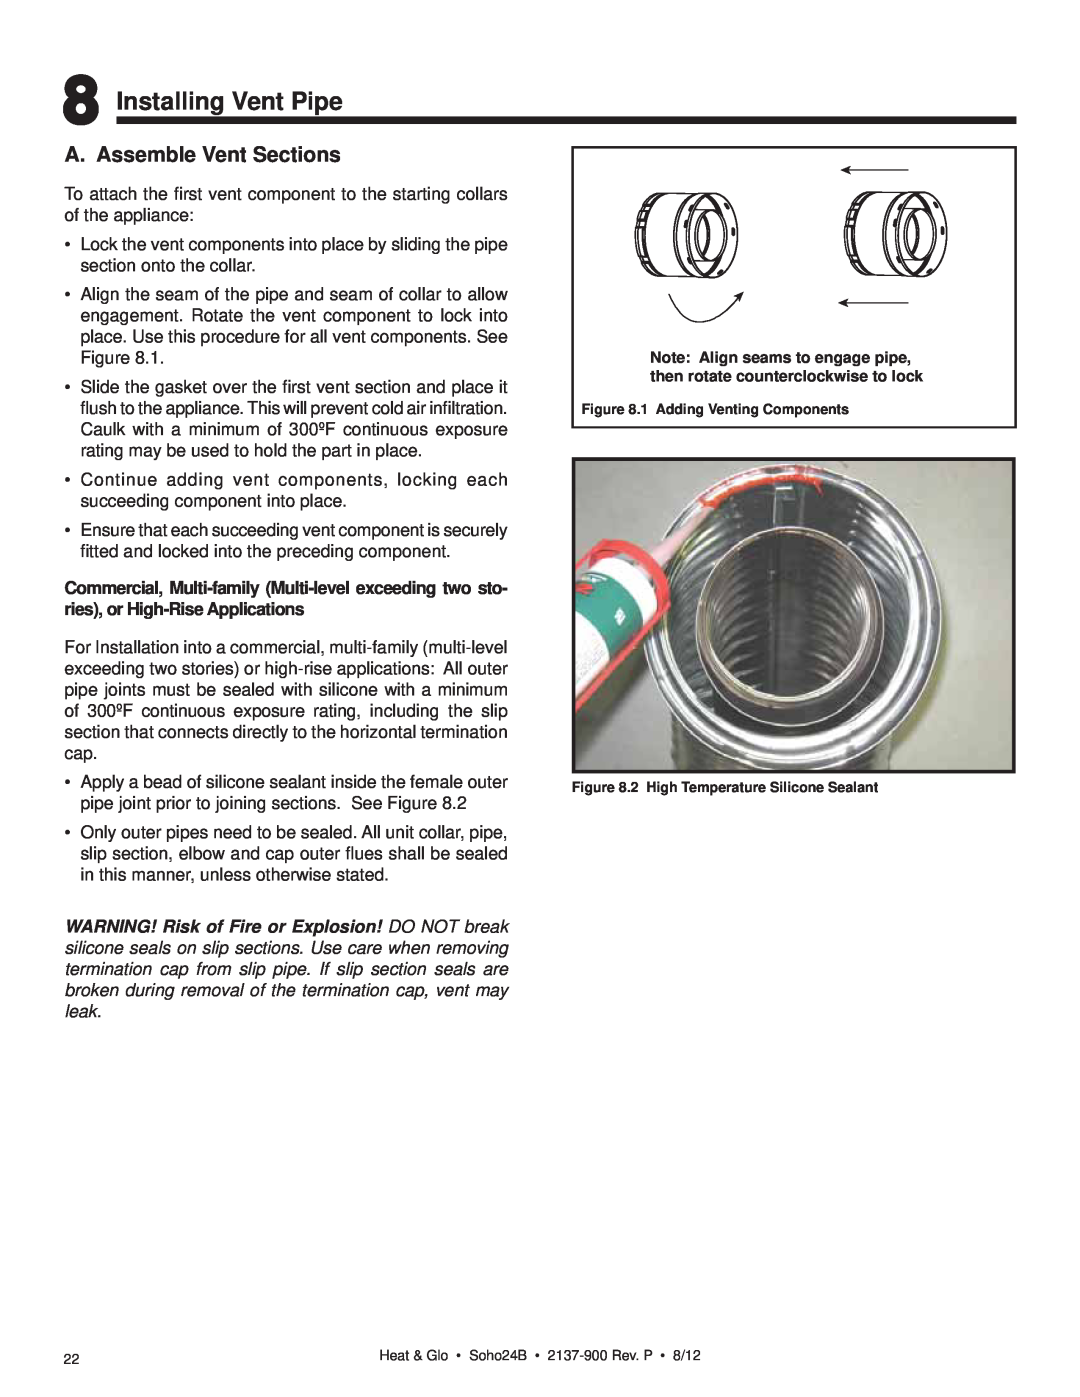 Heat & Glo LifeStyle 2137-900 owner manual Installing Vent Pipe, A. Assemble Vent Sections 